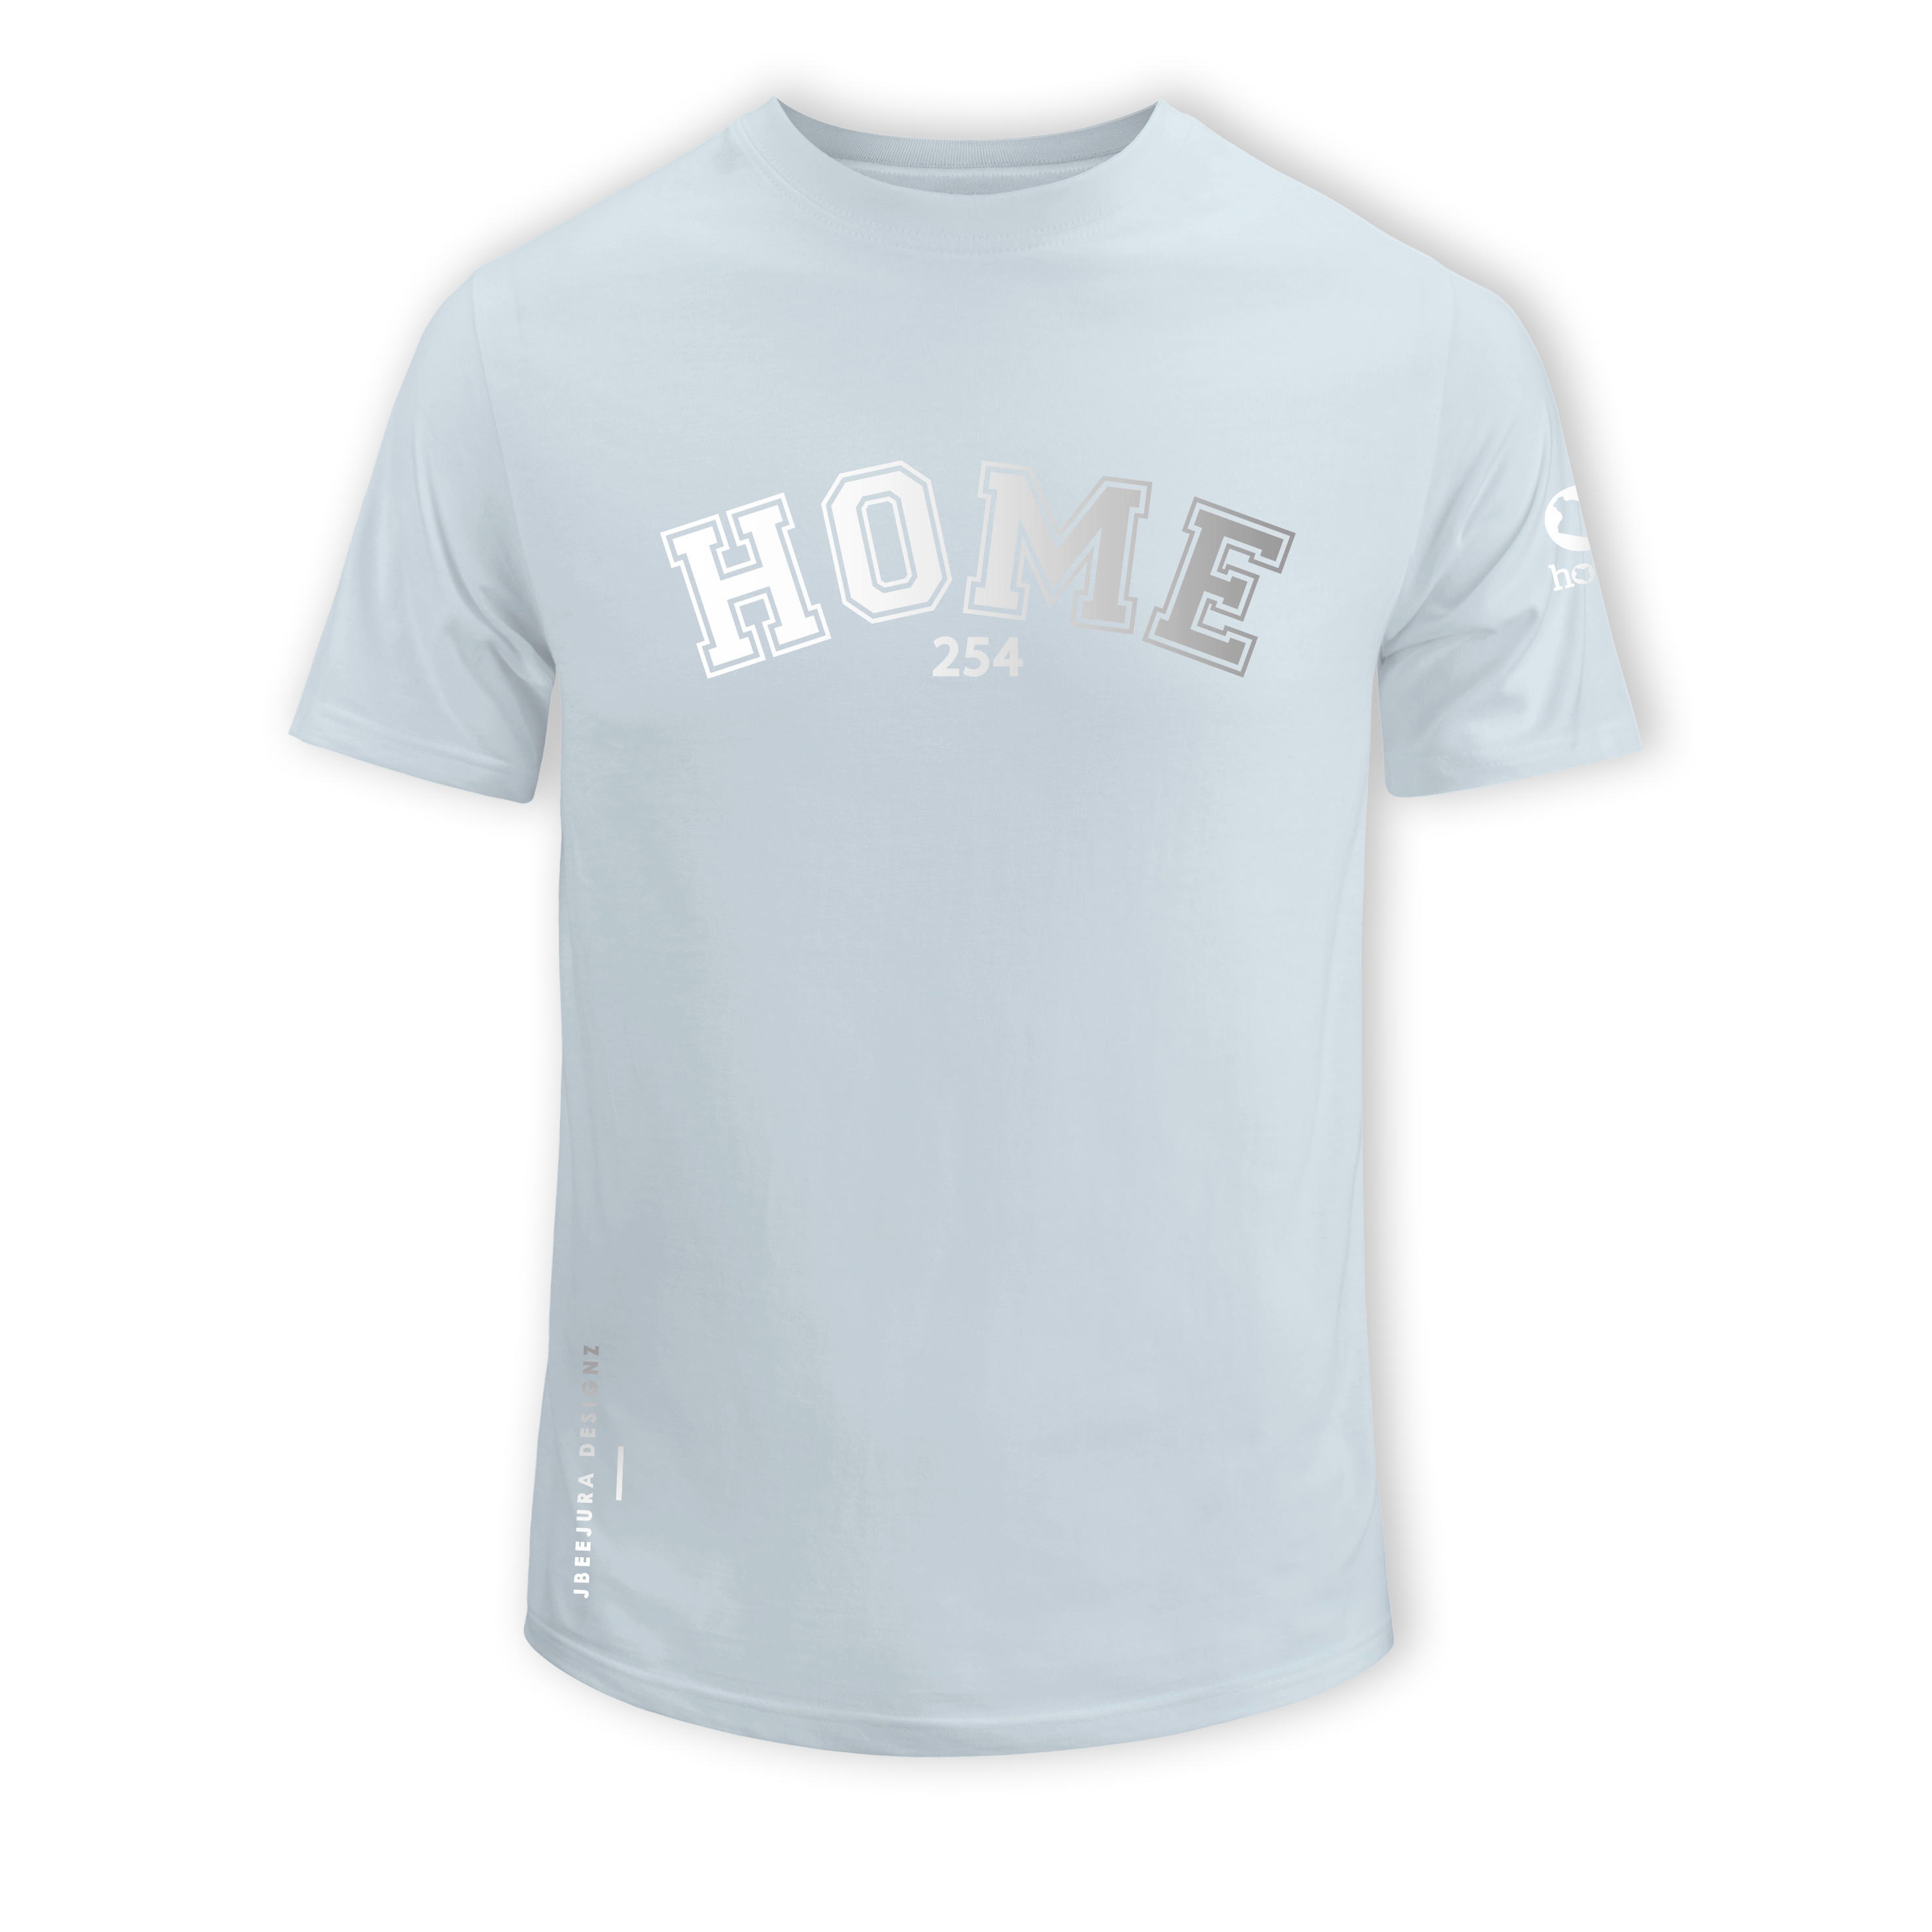 home_254 SHORT-SLEEVED SKY-BLUE T-SHIRT WITH A SILVER COLLEGE PRINT – COTTON PLUS FABRIC